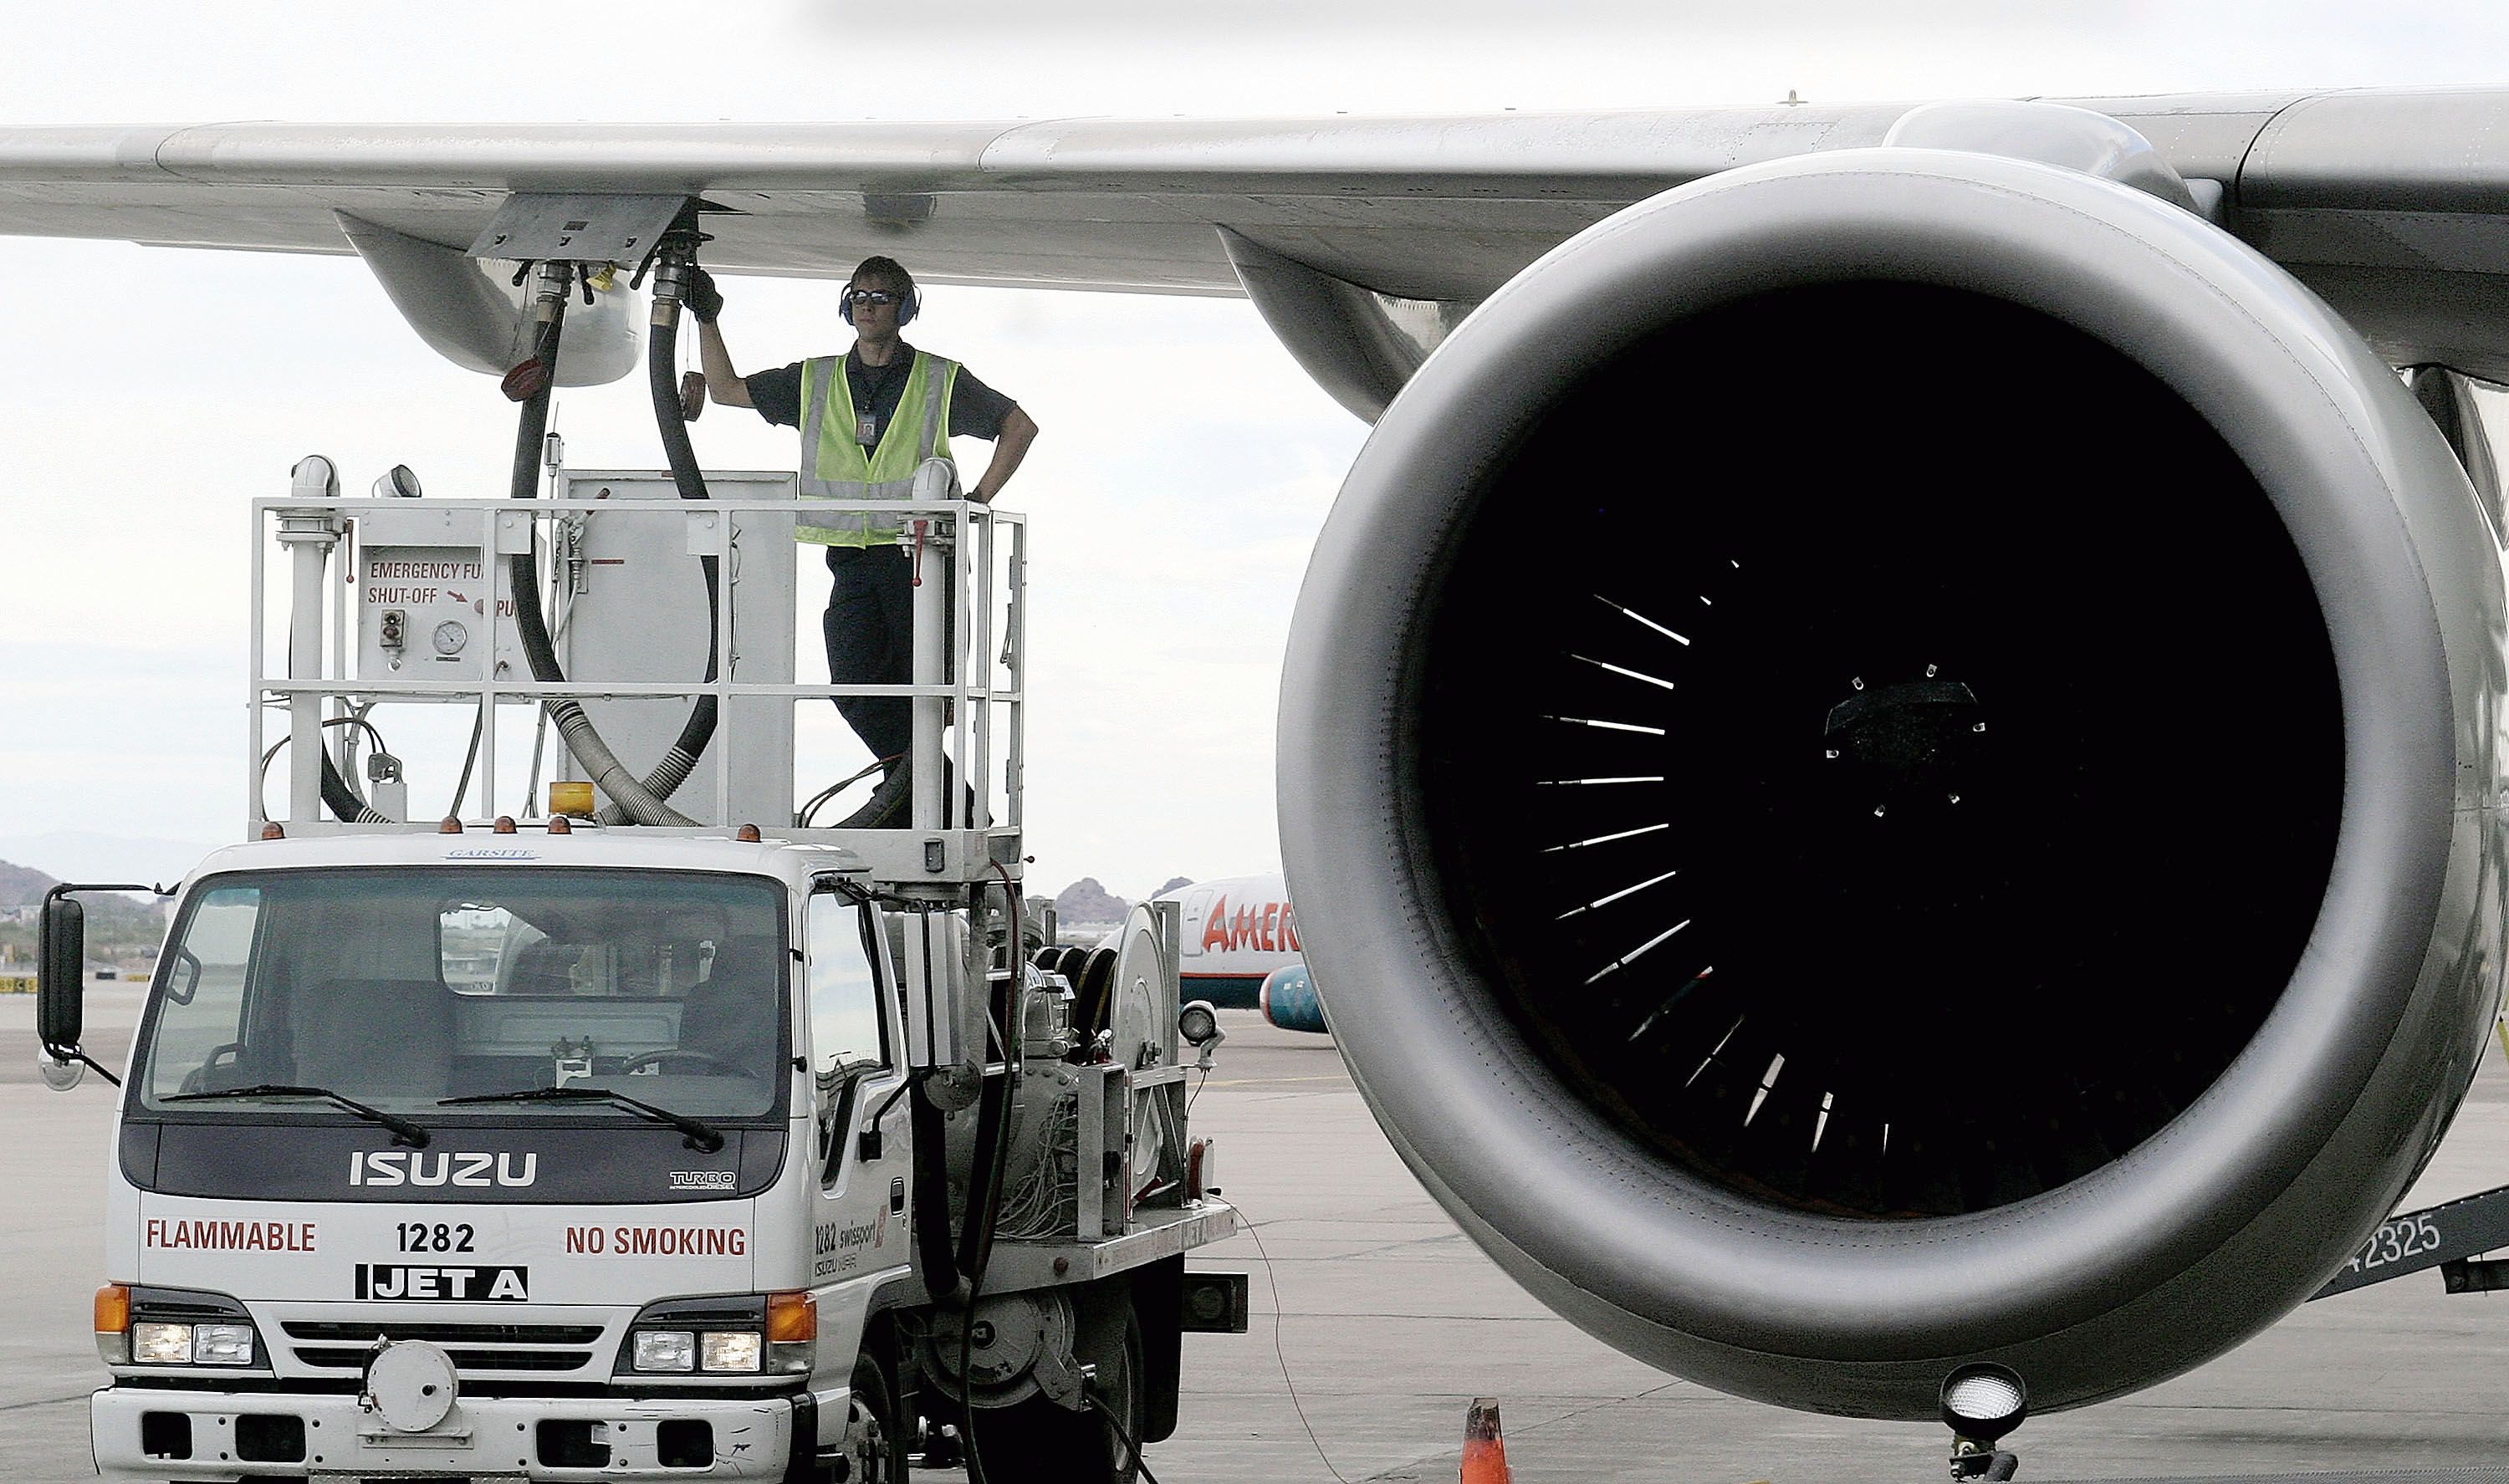 Aircraft being refueled with close up of engine